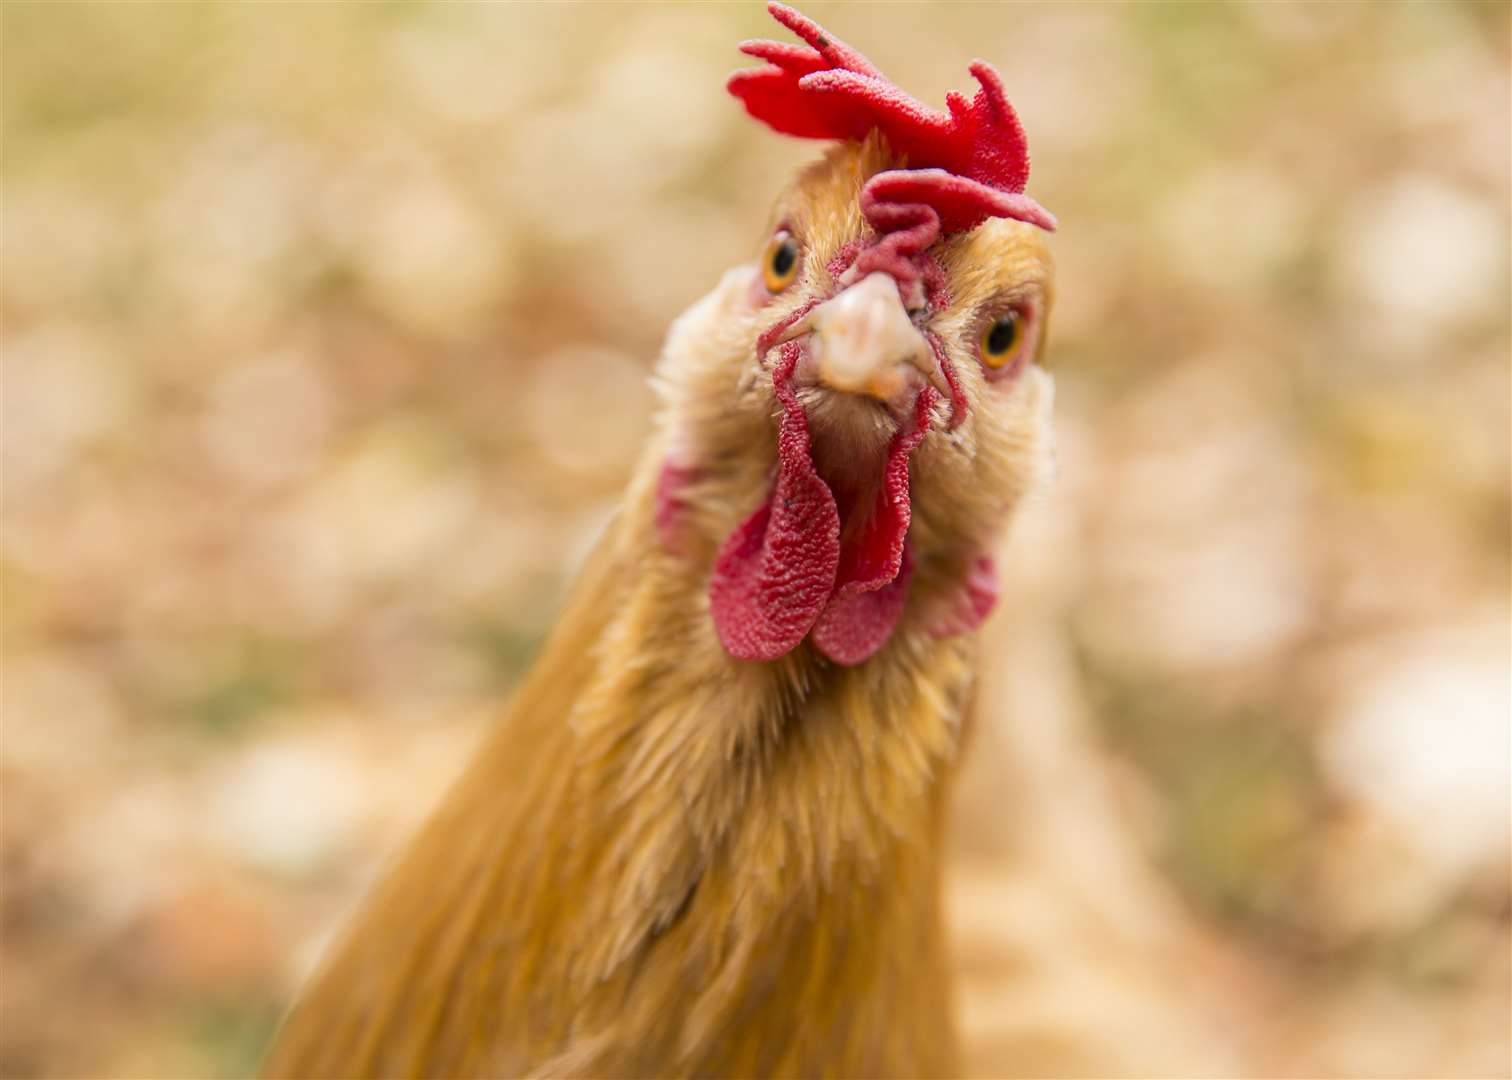 Five chickens have been killed in an attack at a farm. Stock Image